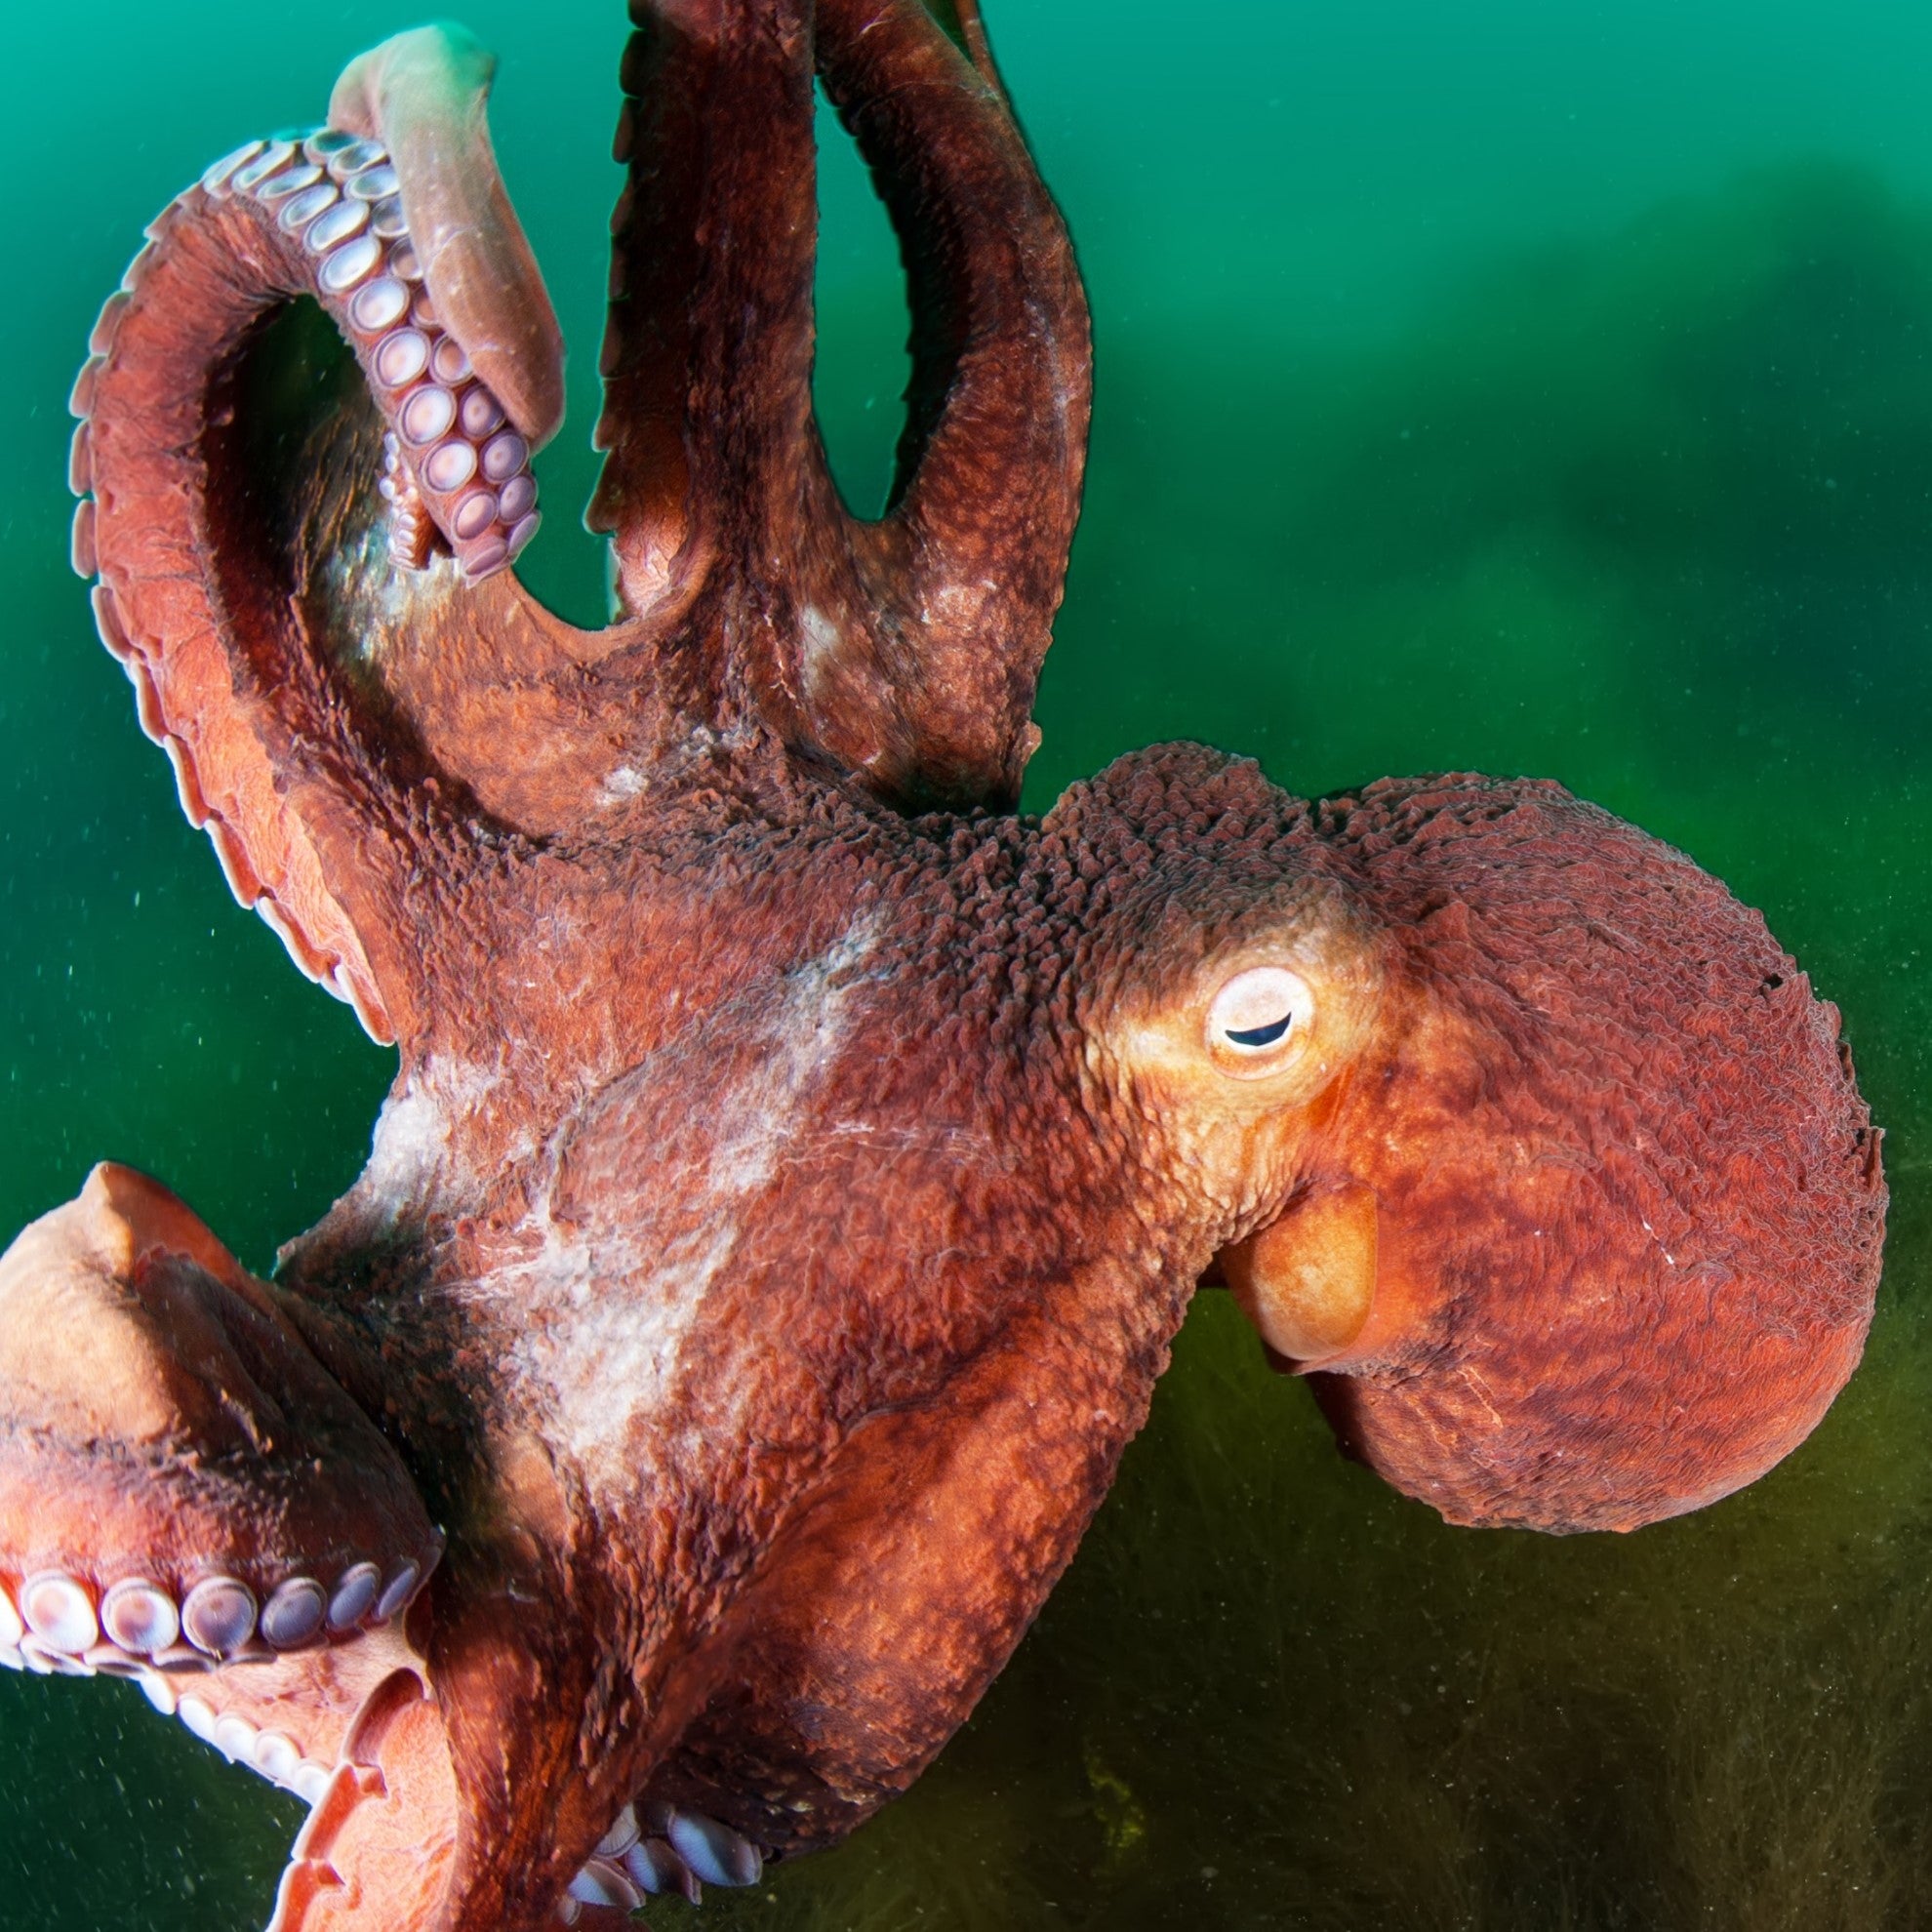 A picture of a giant Pacific octopus under water